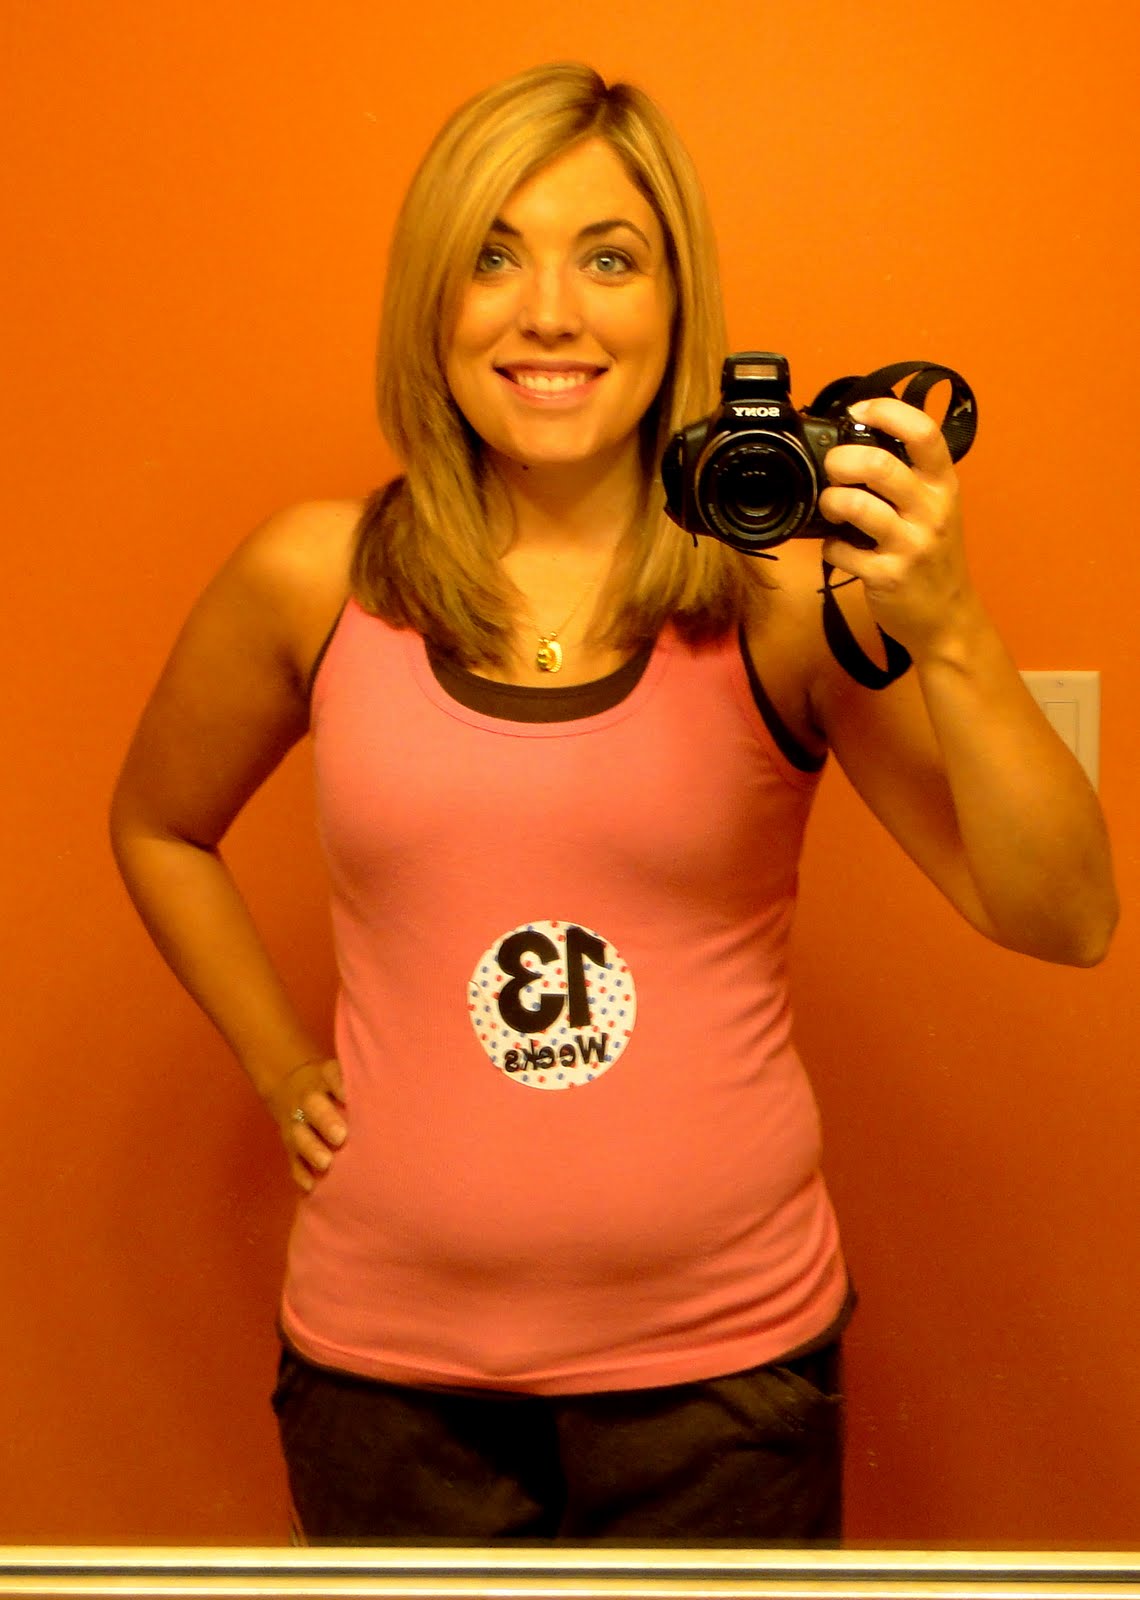 the-journey-of-parenthood-13-weeks-pregnant